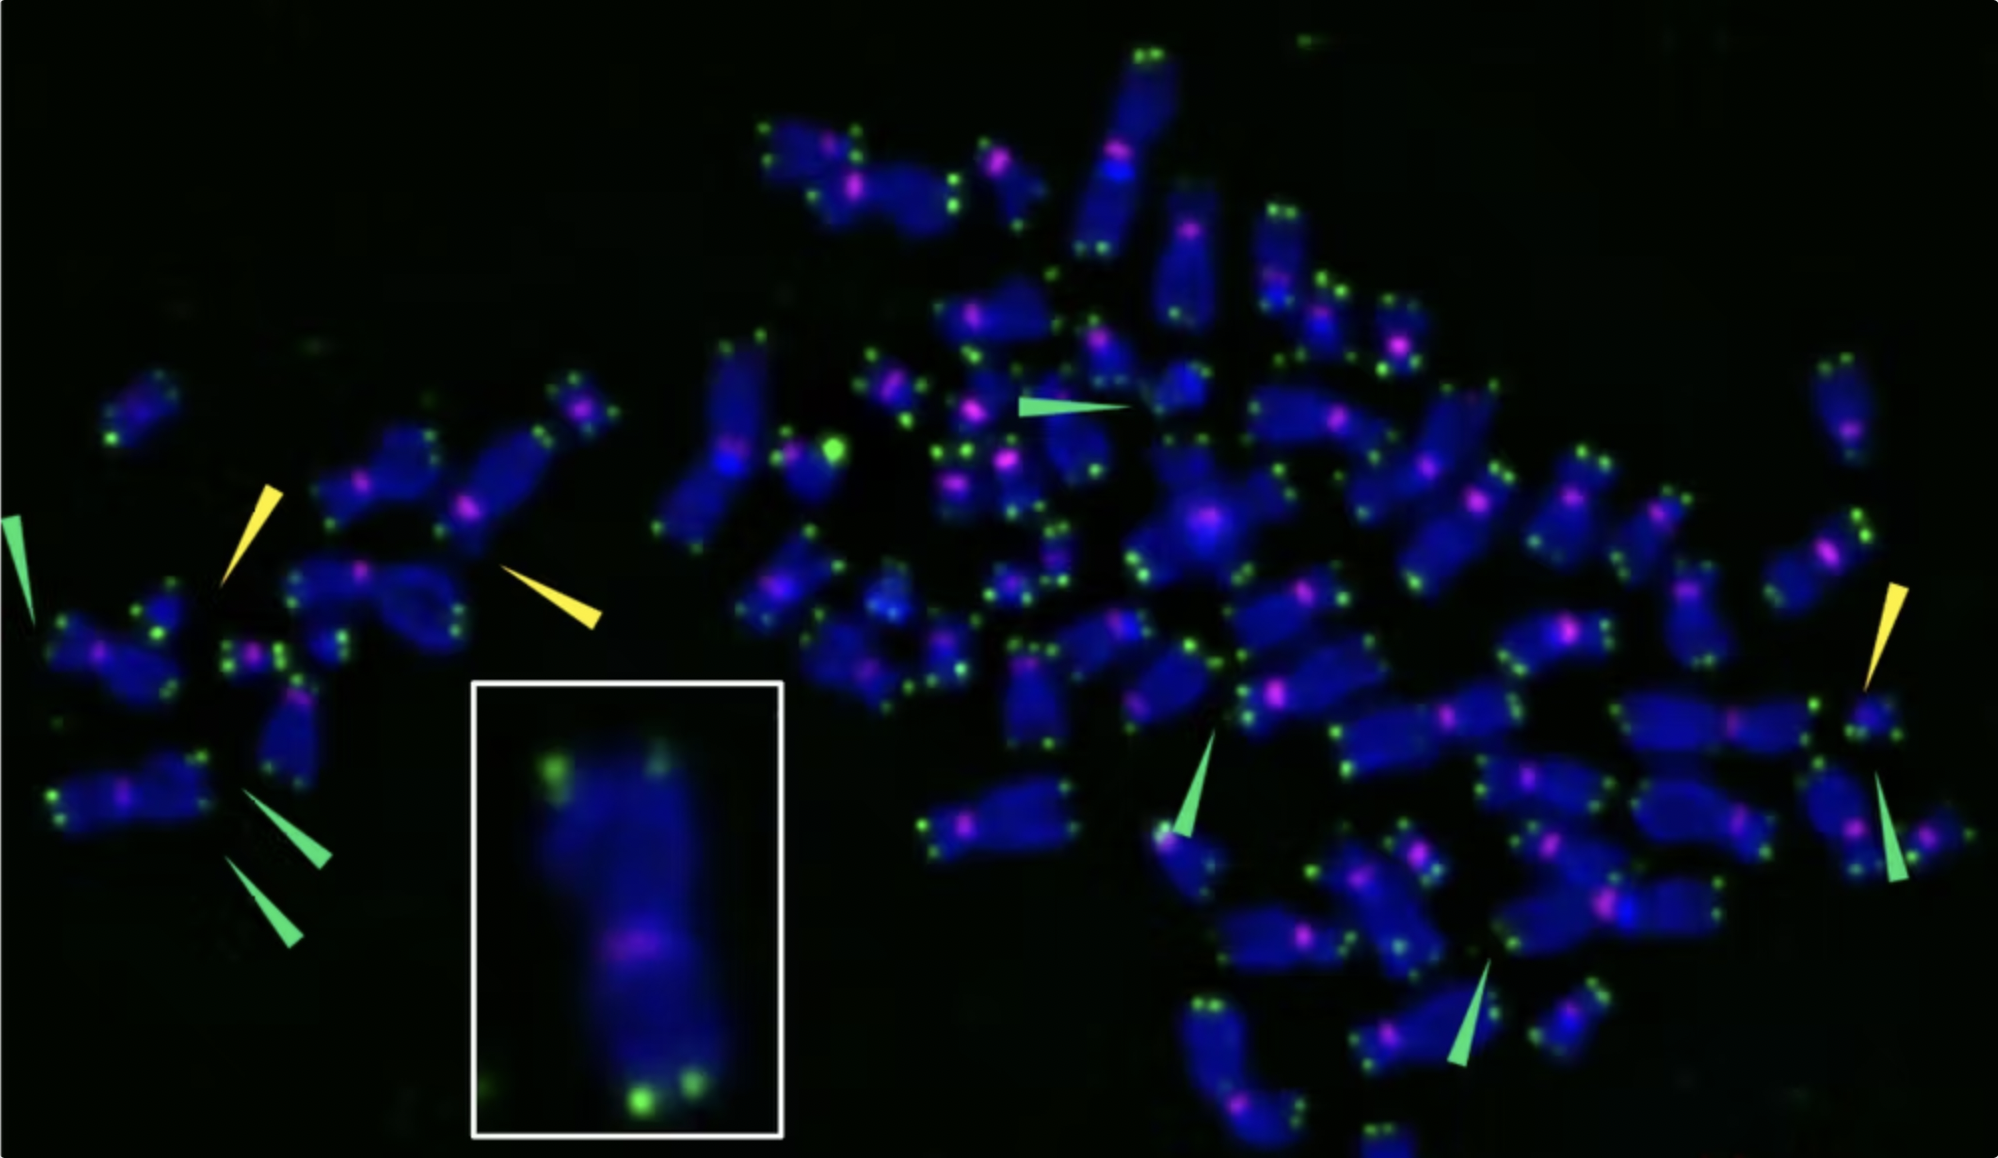 The telomeres (green) at the tips of chromosomes (blue) damaged by free radicals become fragile (green arrows) and trigger senescence.